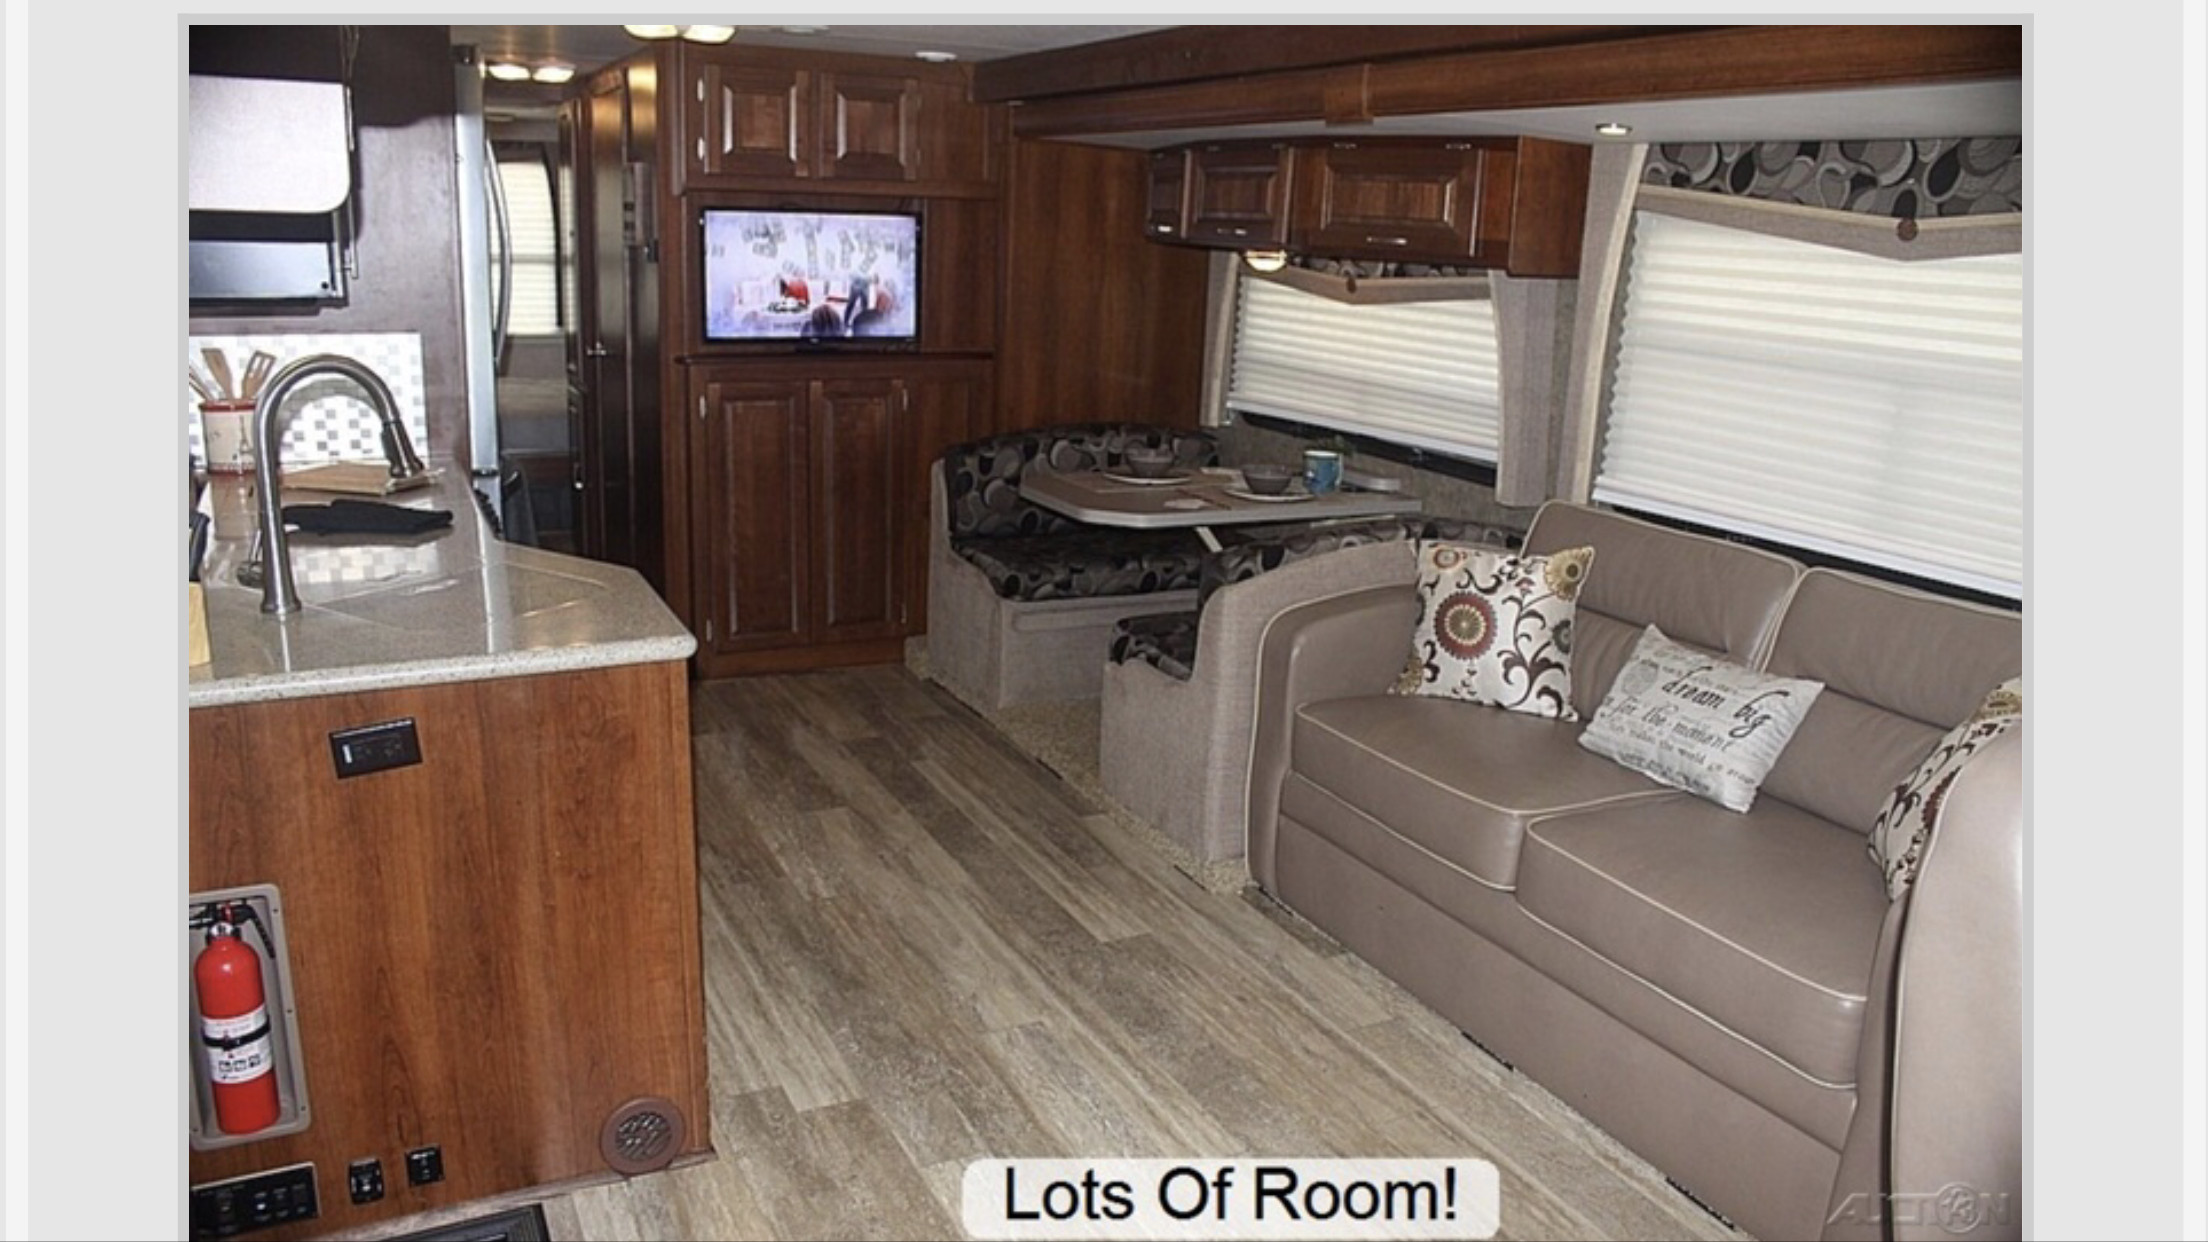 hardwood floor restoration tampa of top 25 fayetteville nc rv rentals and motorhome rentals outdoorsy in hittpvpu3o2z8w07yfnk